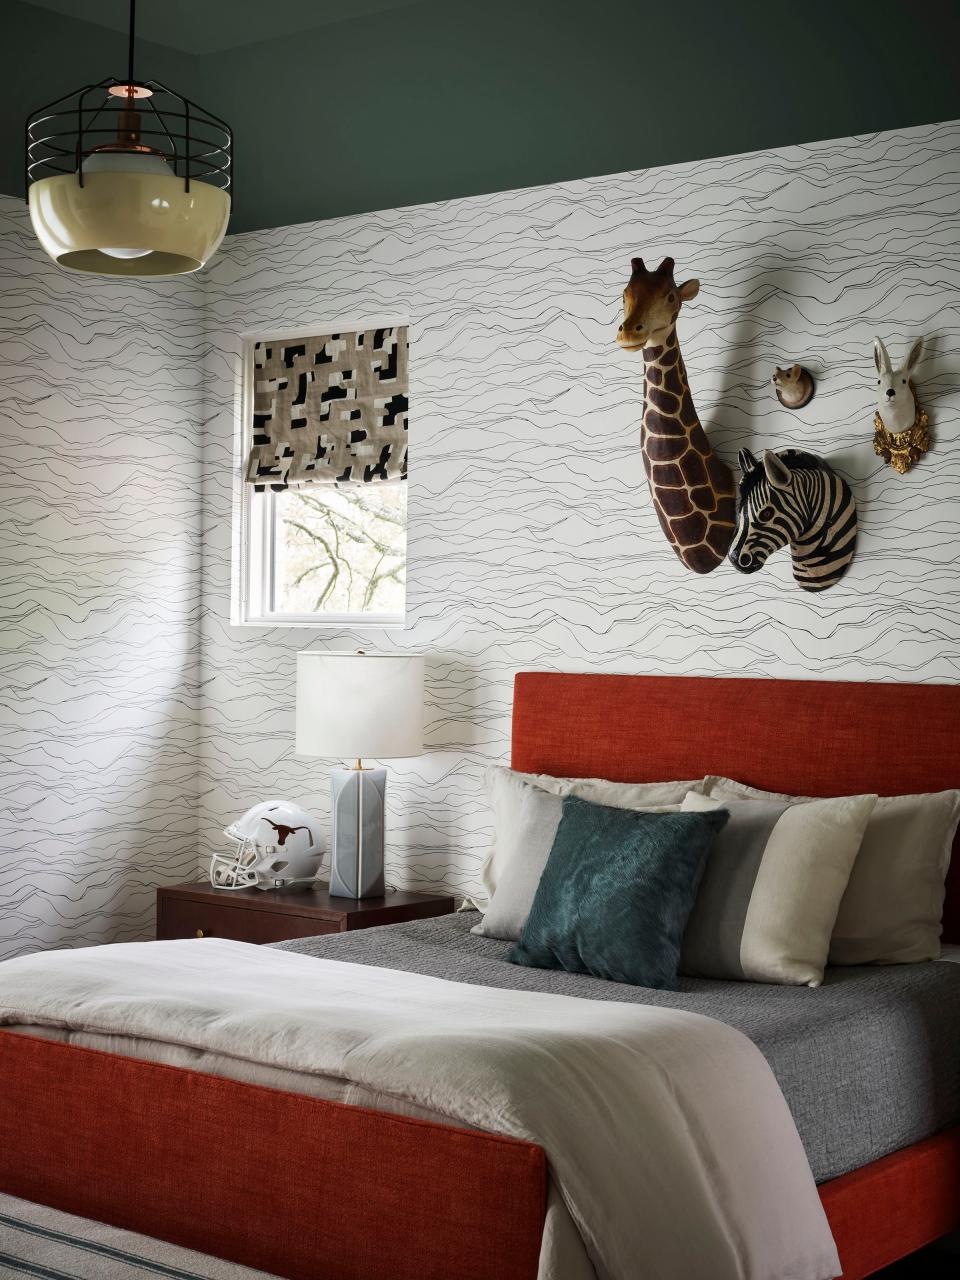 In this boy’s room, papier-mâché animal mounts from Nickey Kehoe keep the vibe childlike. The custom linen-upholstered bed, on the other hand, could last well into his teenage years.